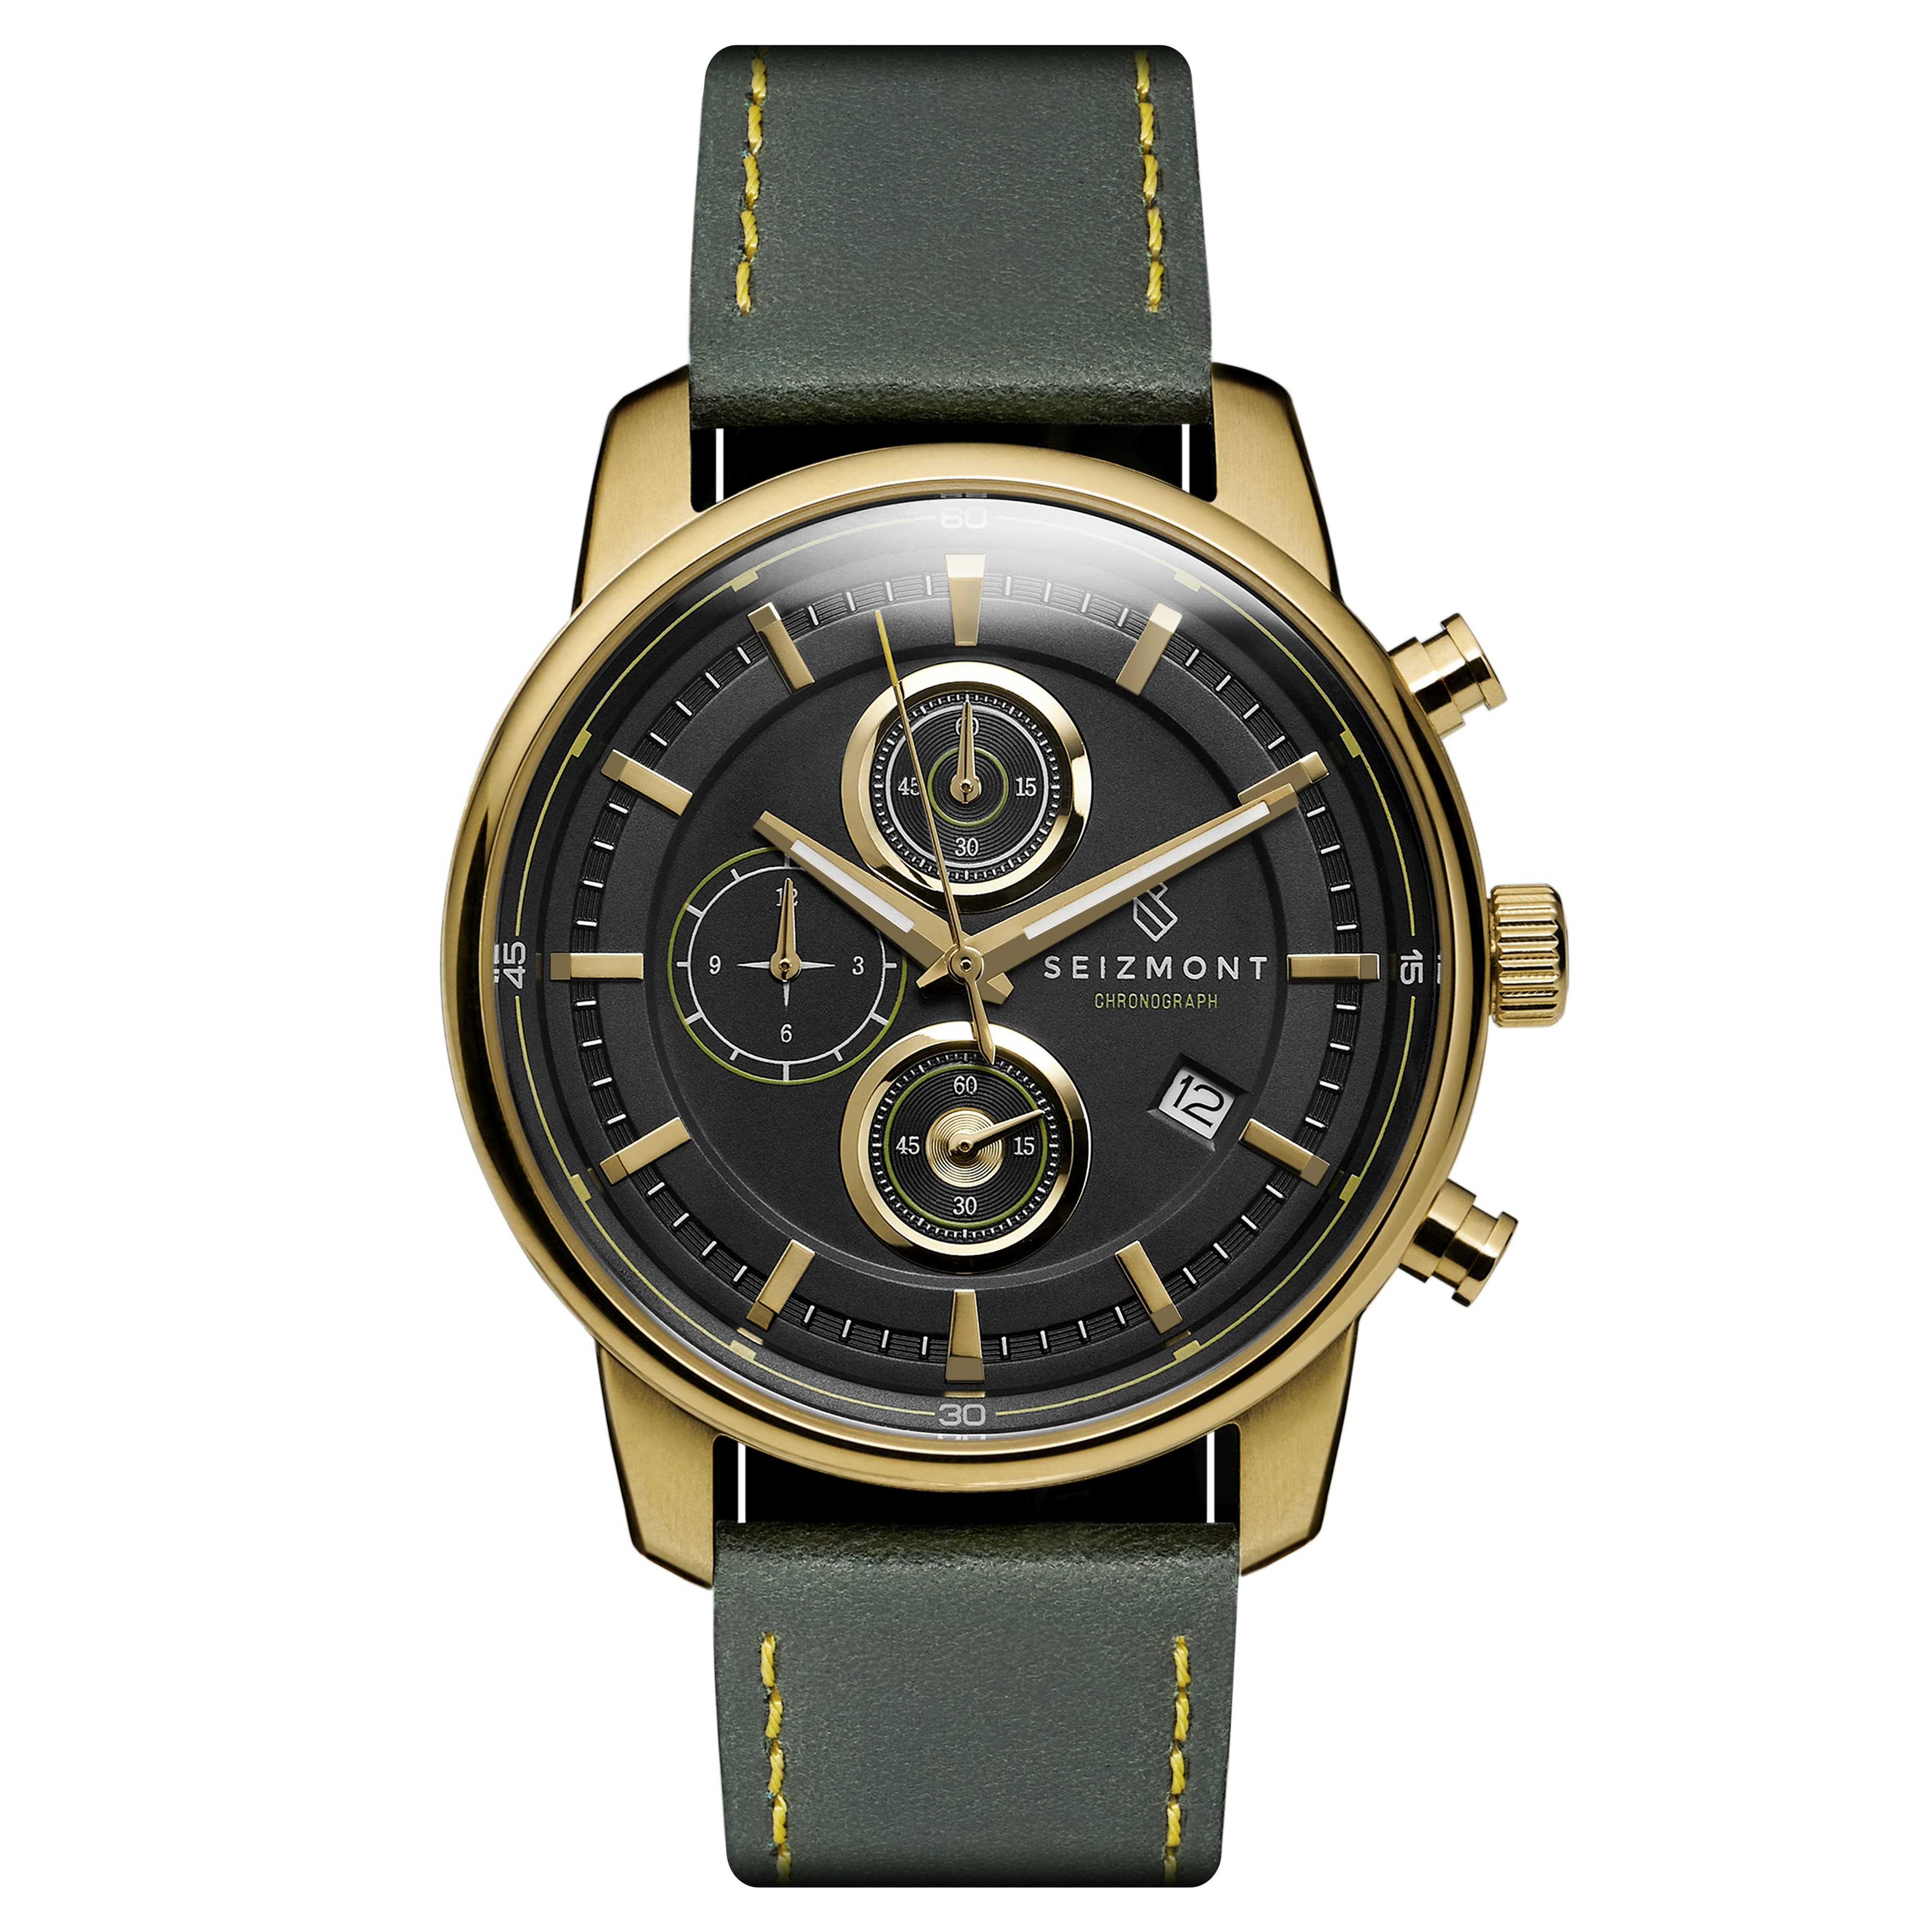 Parva | Gold-Tone Chronograph Watch stock! | | Seizmont Green With In & Strap Dial Leather Black